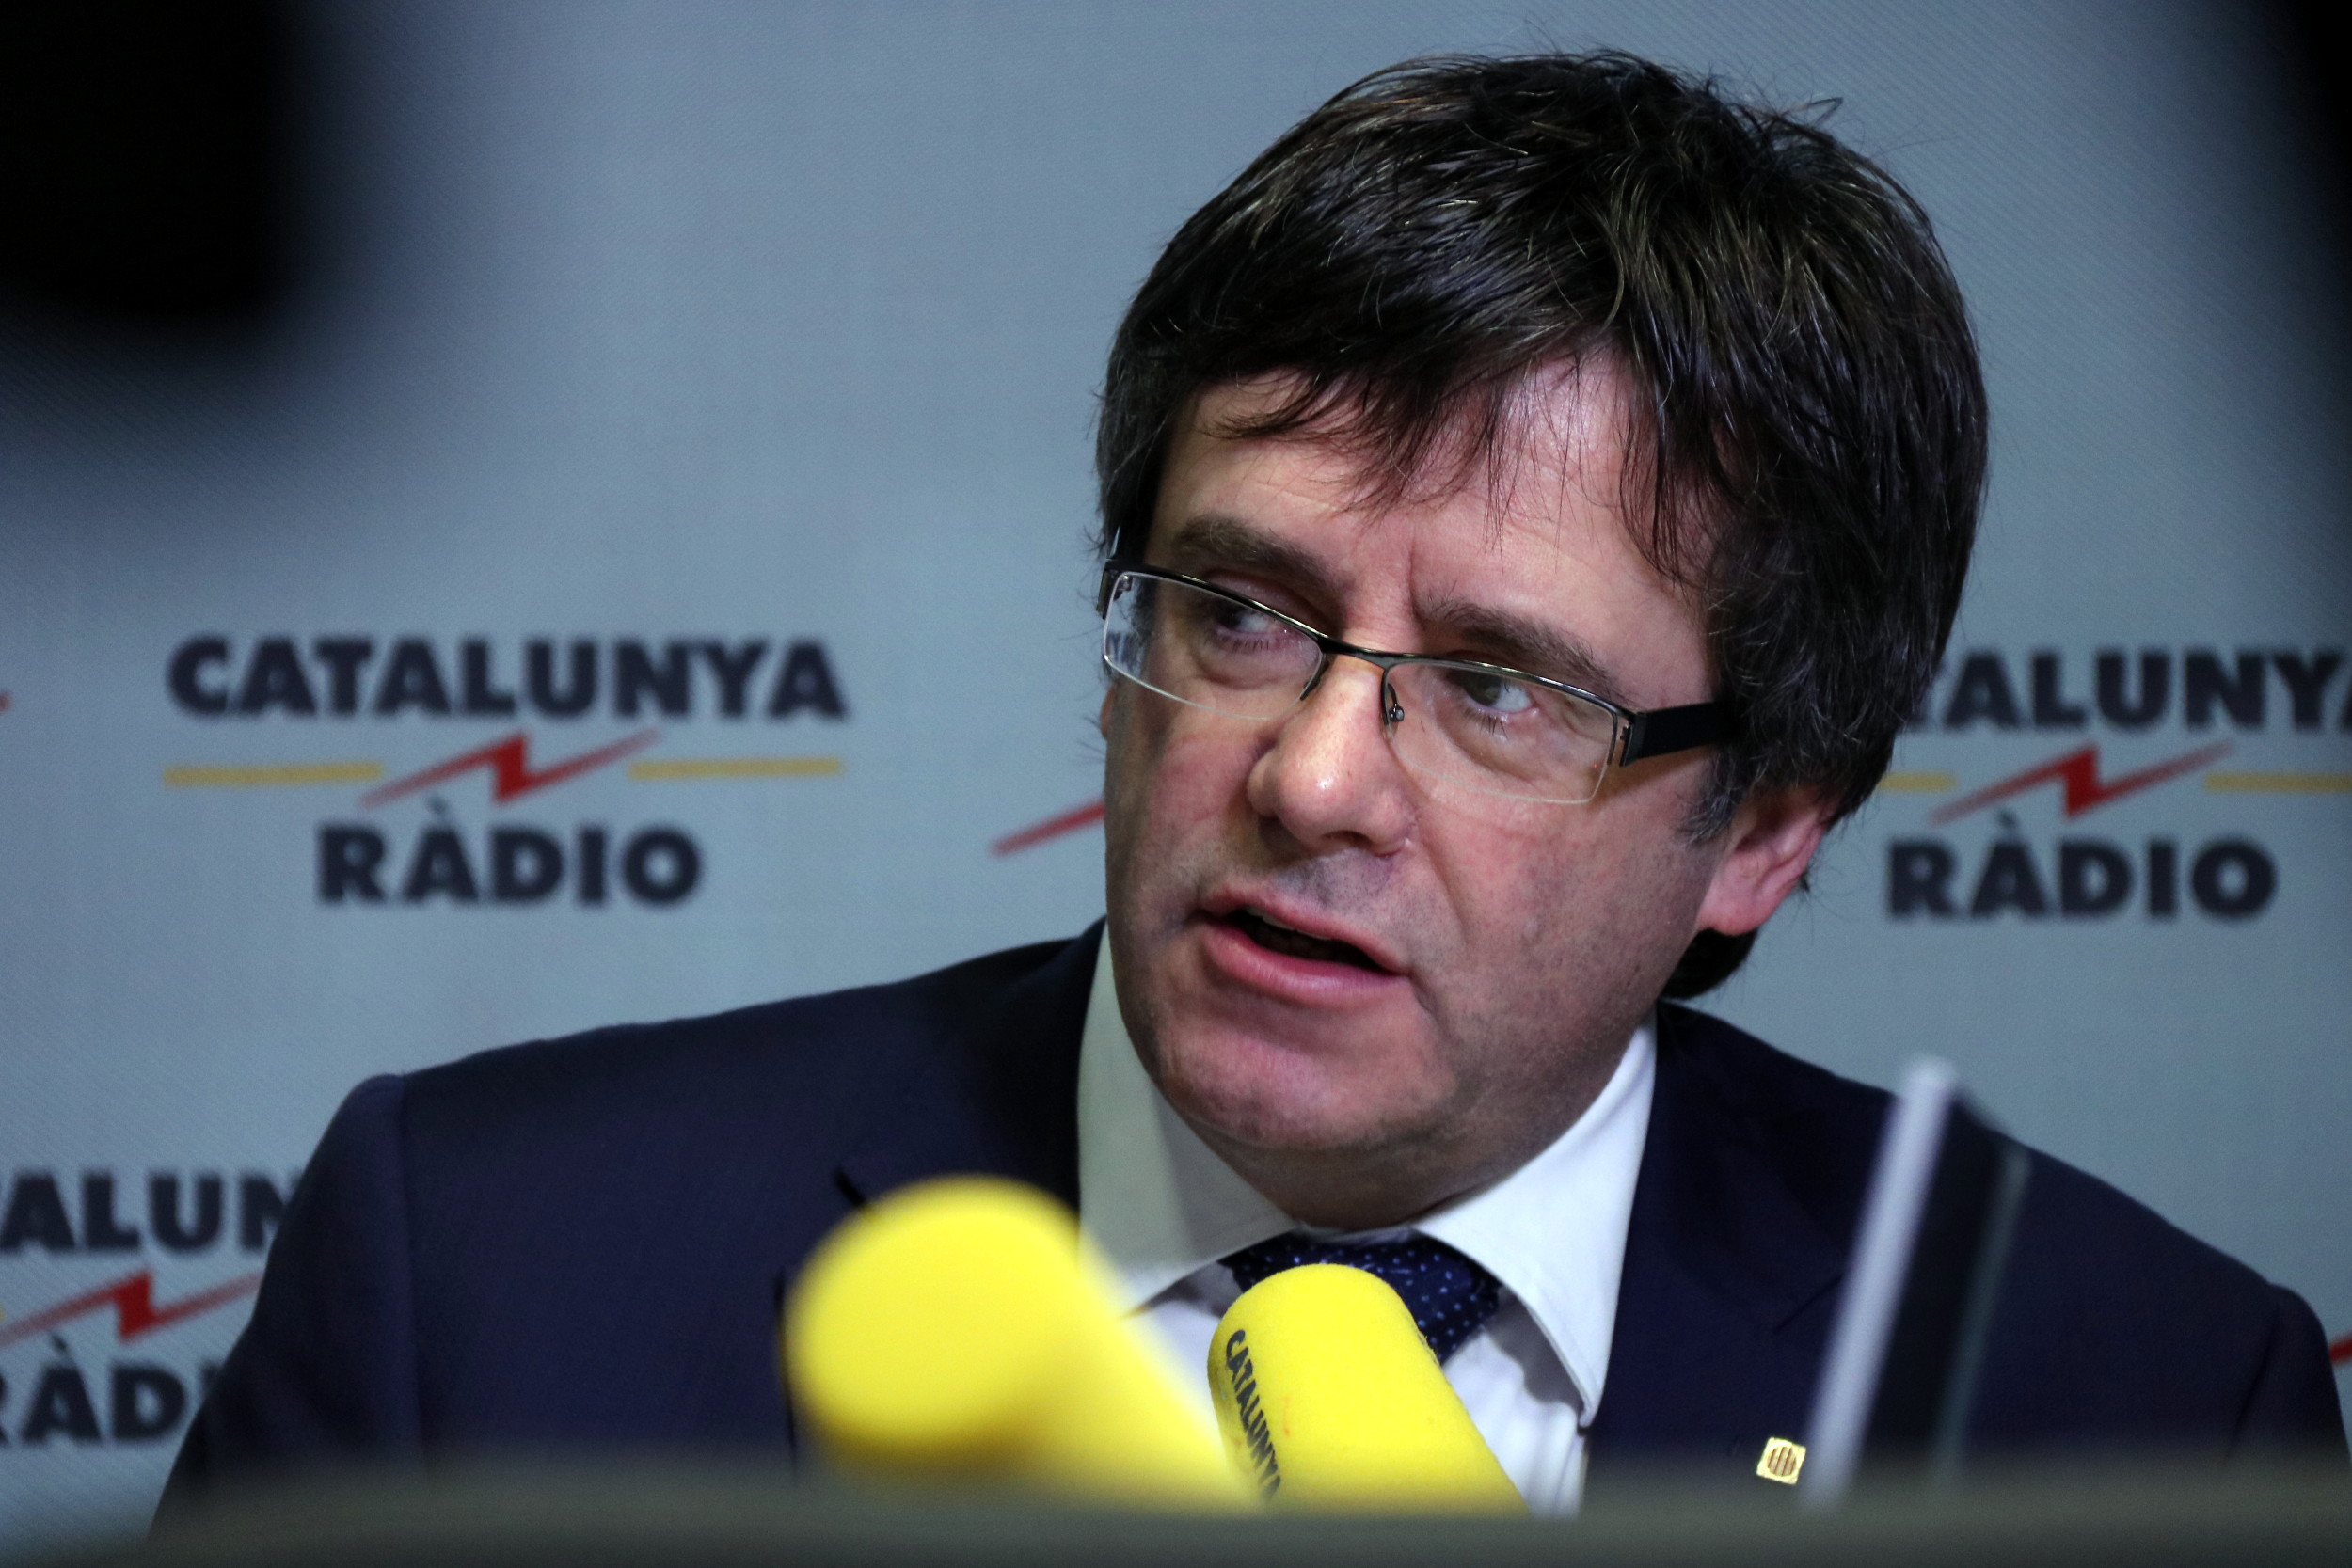 Catalan President, Carles Puigdemont, during an interview with Catalunya Radio (by ACN)